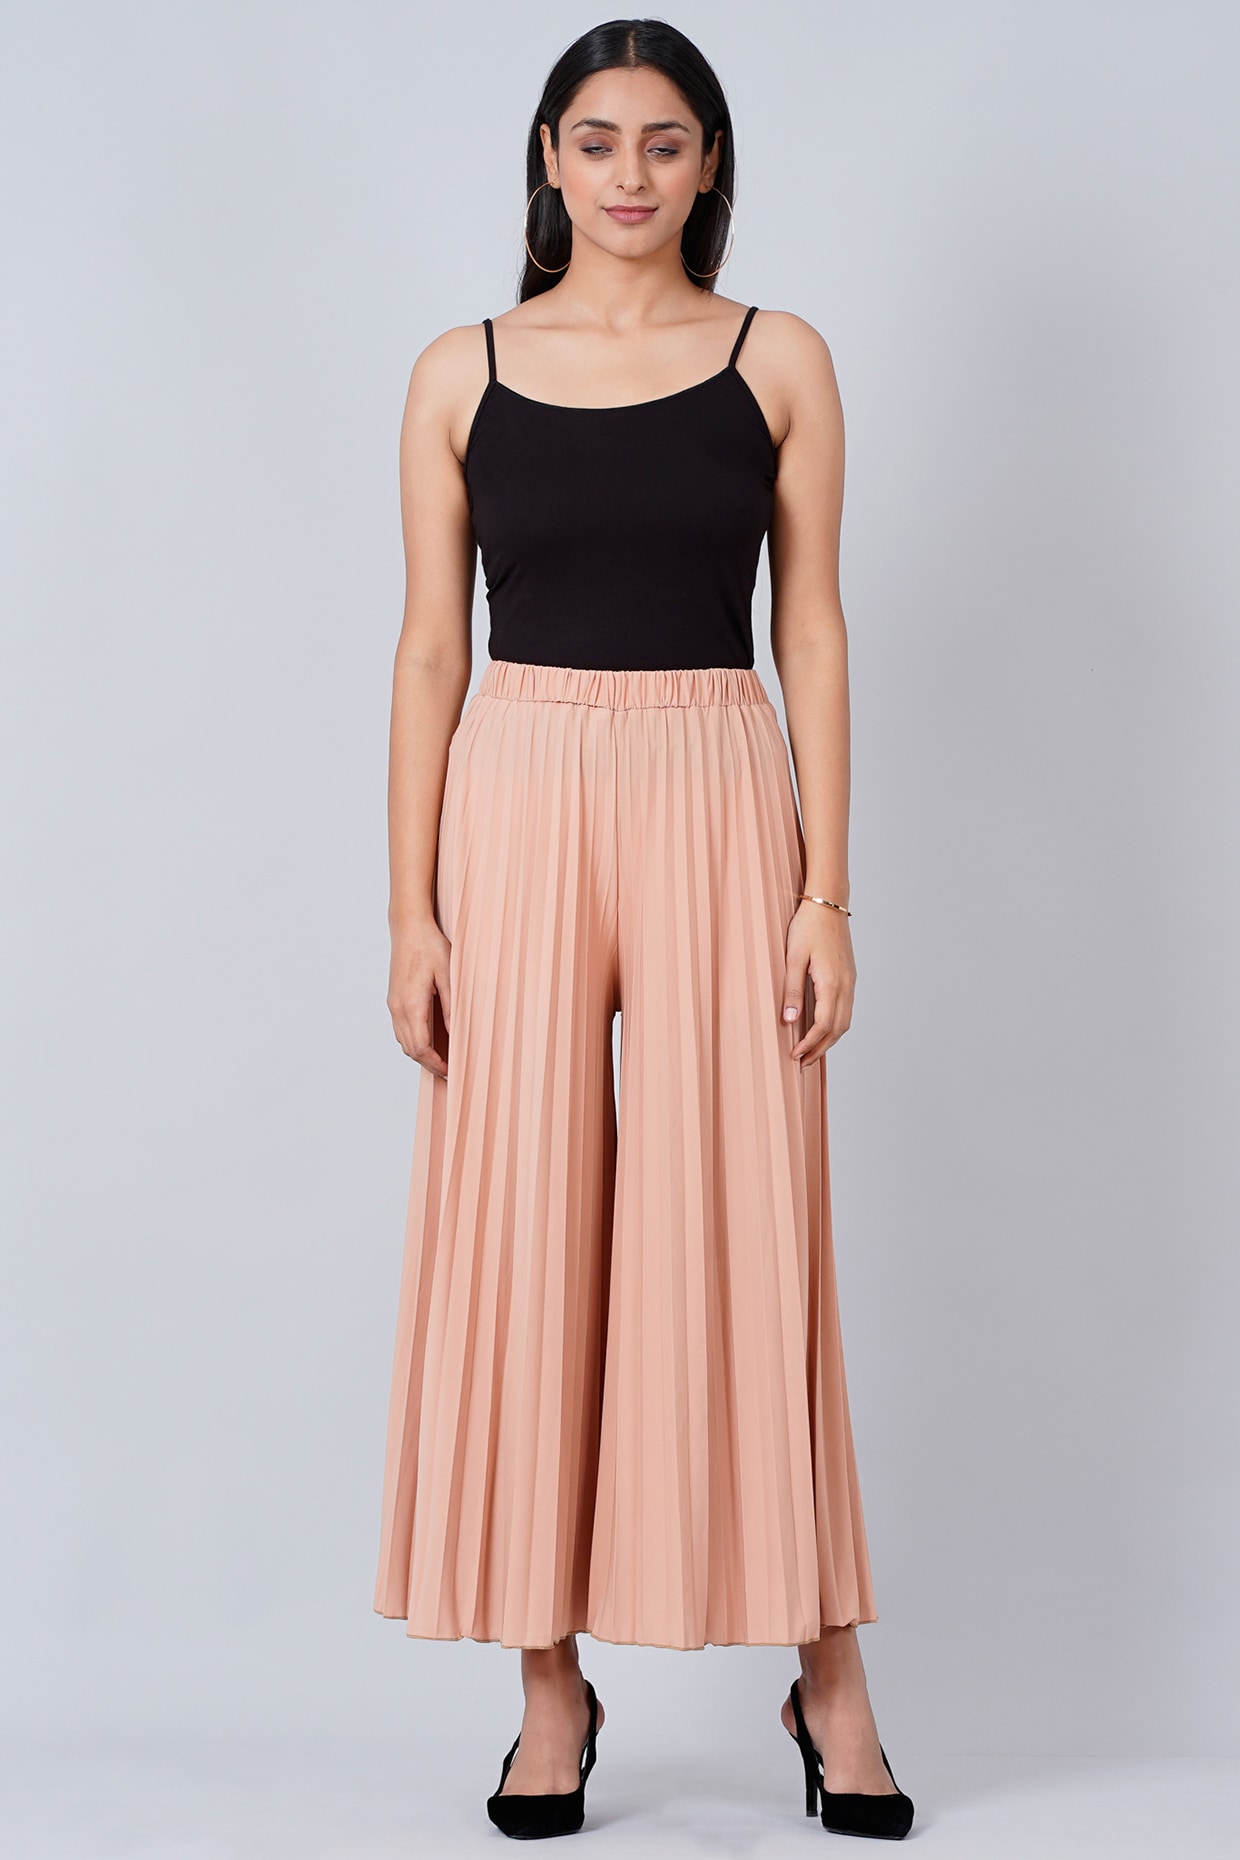 Free People Movement Blissed Out Pant Long Wide Leg Ribbed Pull On Peach XS  NWT | eBay